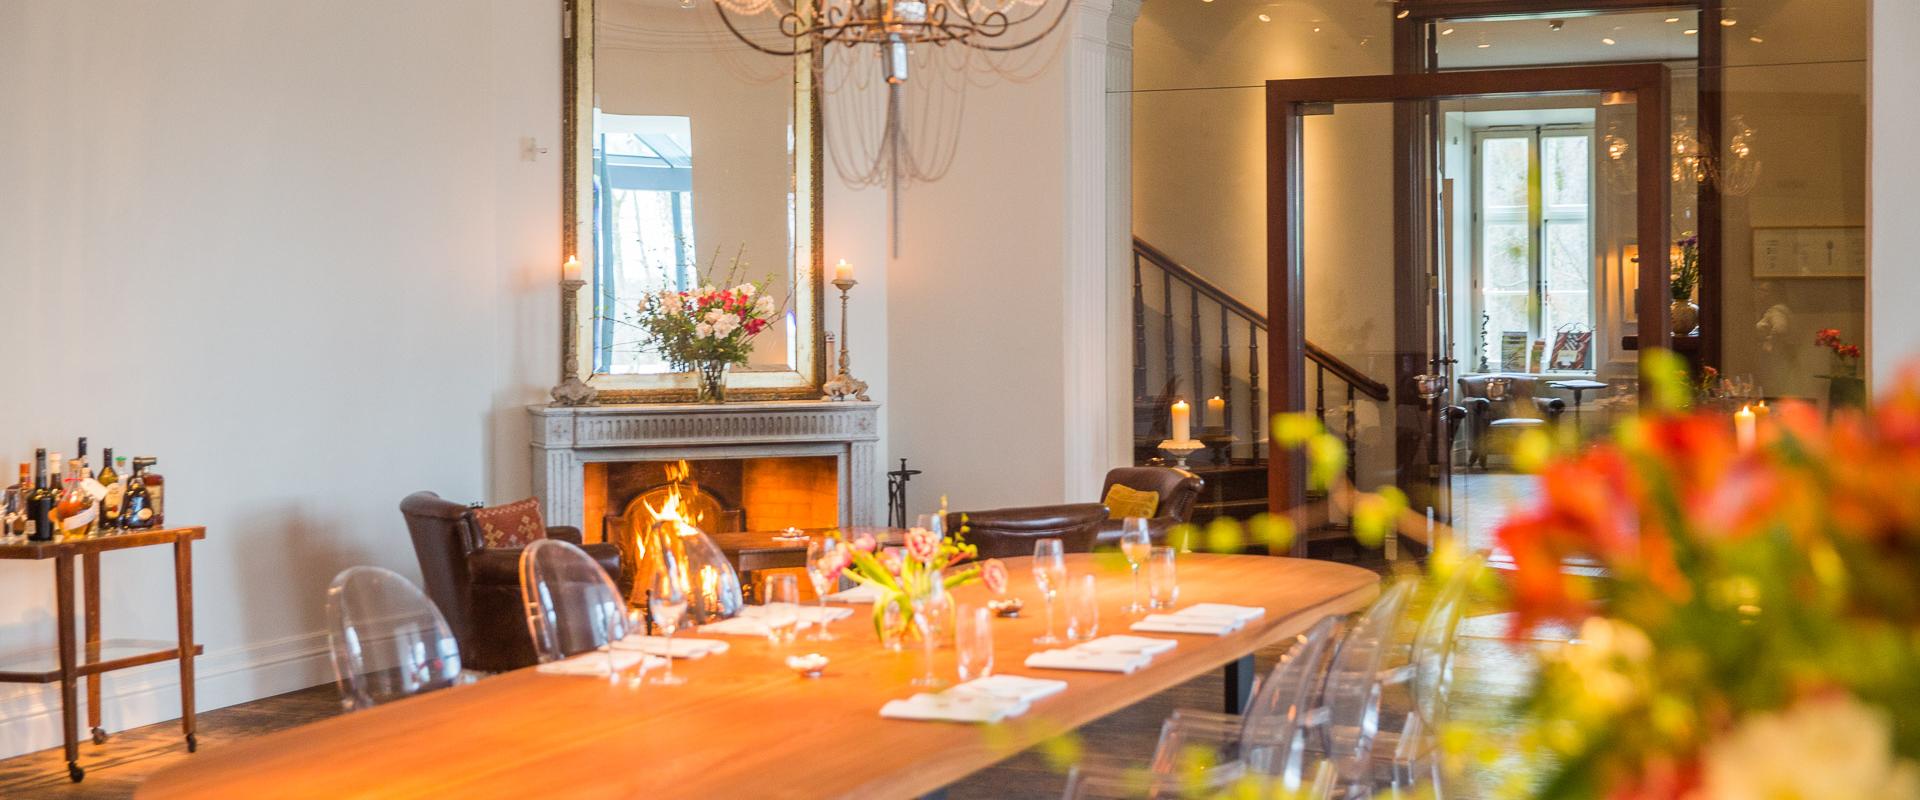 Restaurant Alexander is in the heart and the most respected place of the mansion of Pädaste Manor. The team at Alexander offers delicious food from th